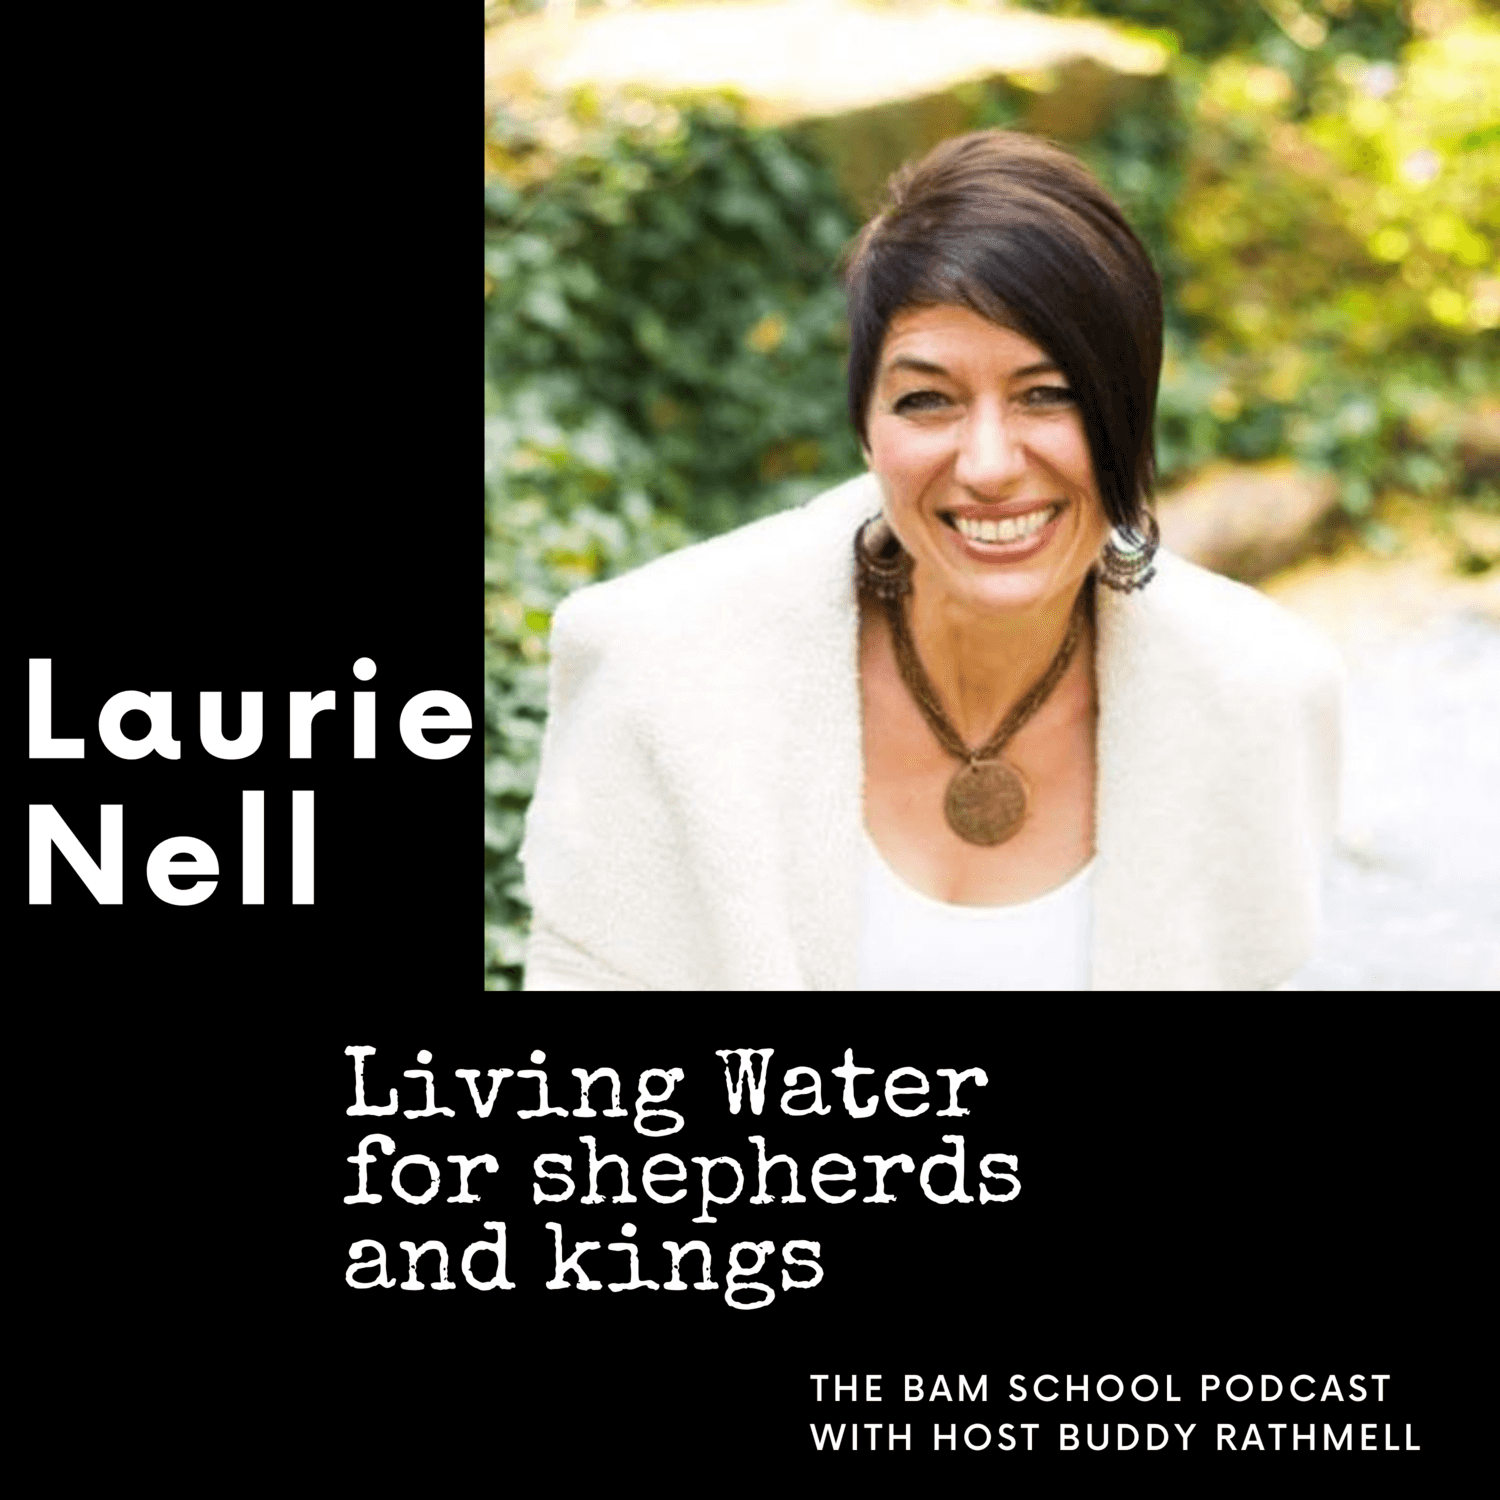 Living Water for shepherds and kings - Laurie Nell